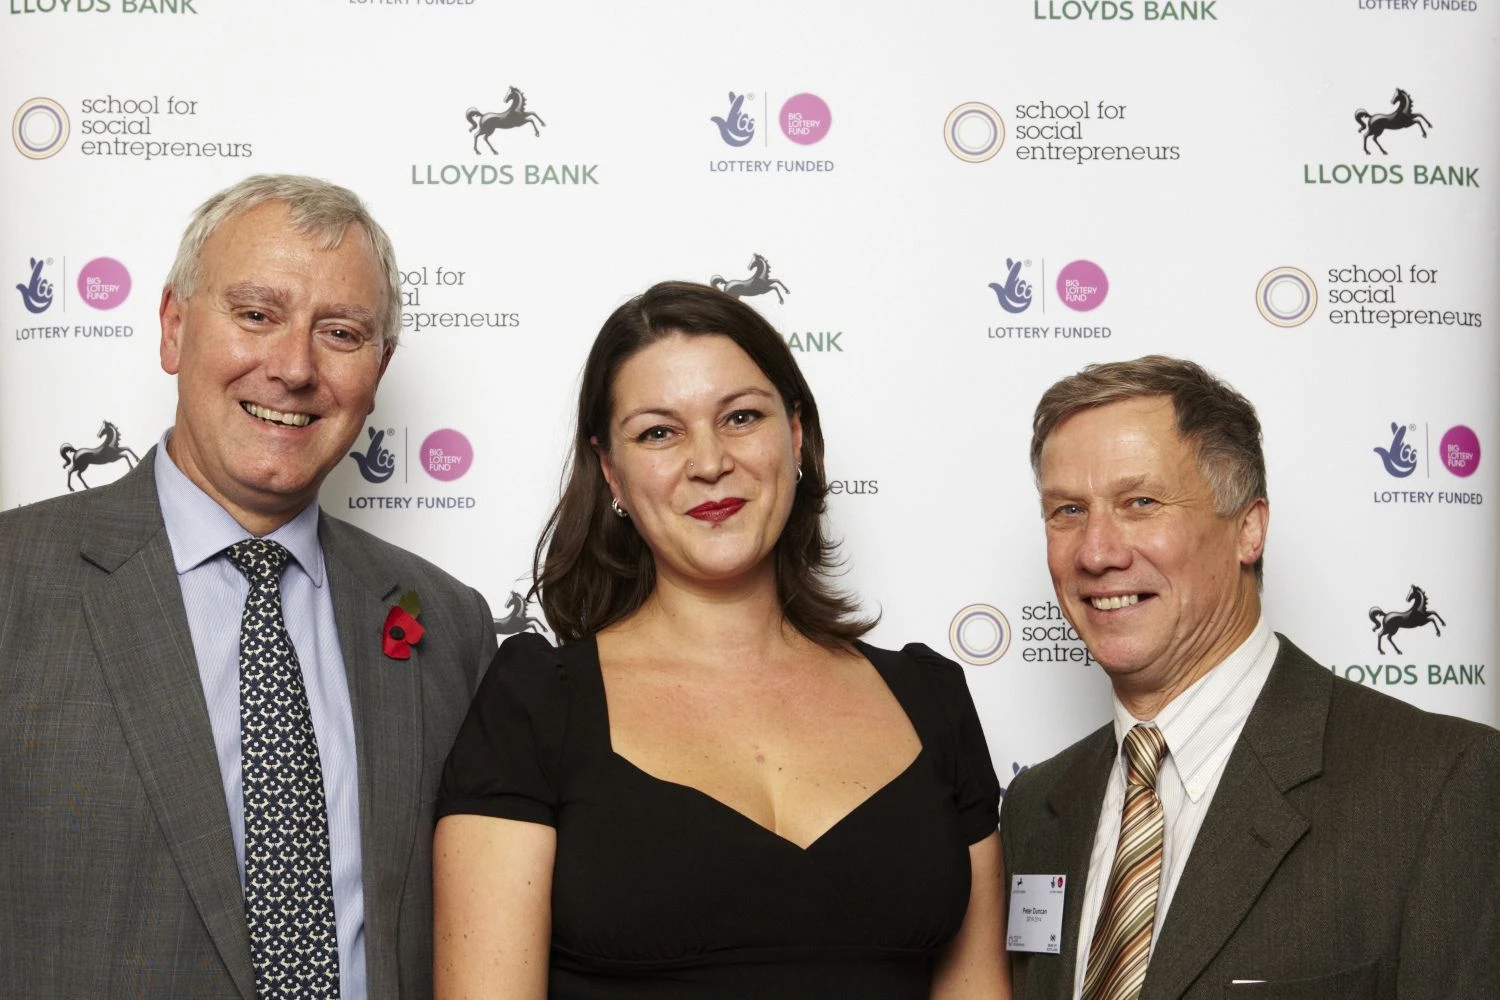 Becky John with Graham Lindsay, Director, Responsible Business & Community Affairs at Lloyds Banking